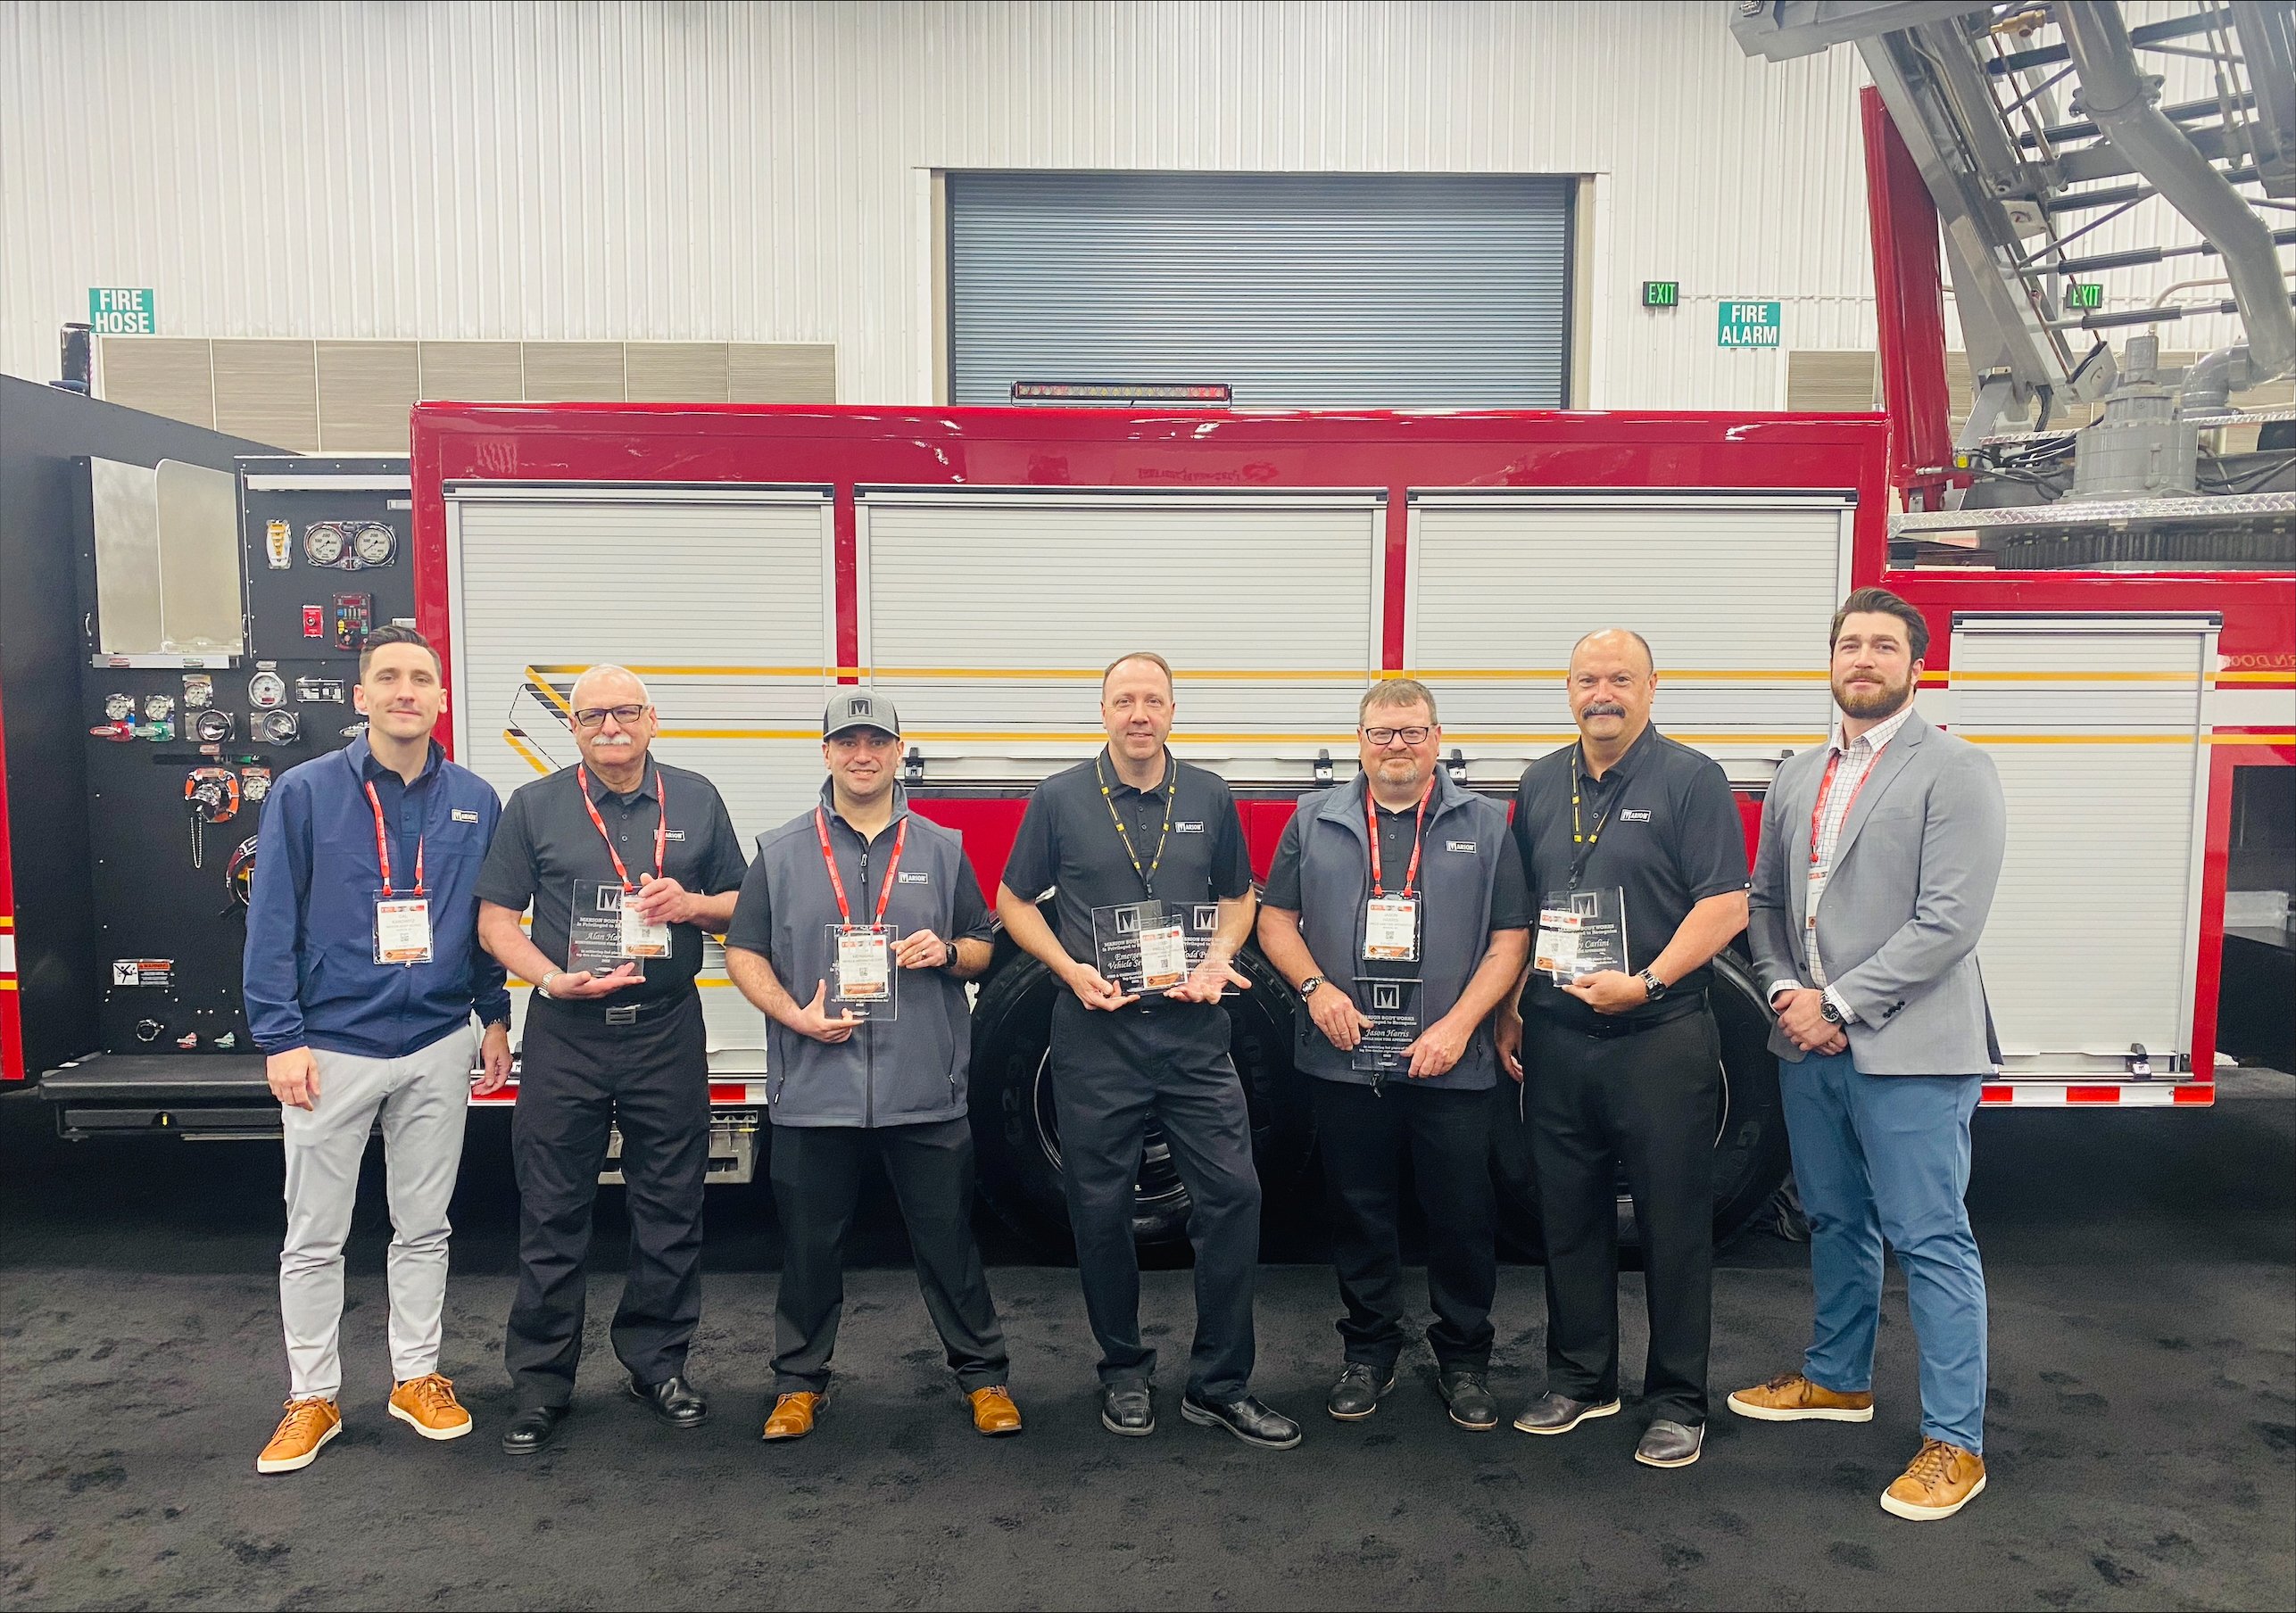 Marion Body Works Presents Awards to Top Dealers